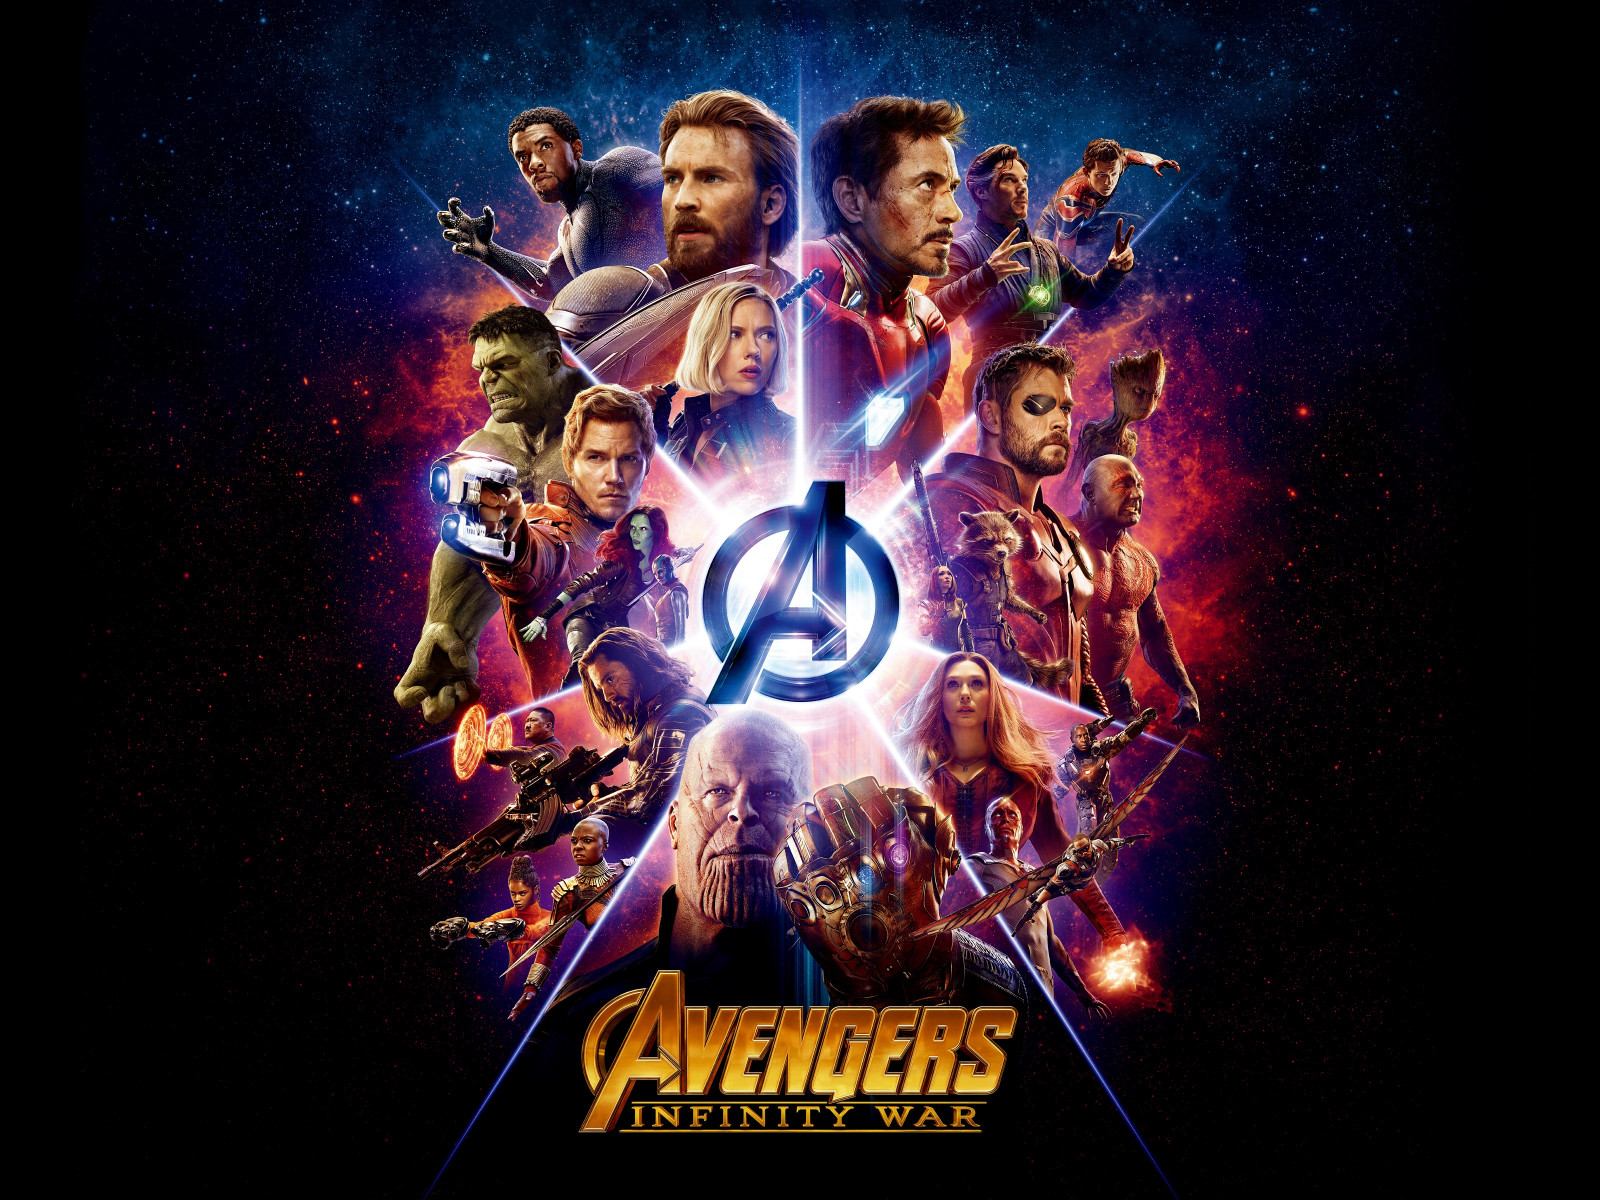 All the heroes from Avengers: Infinity War wallpaper 1600x1200